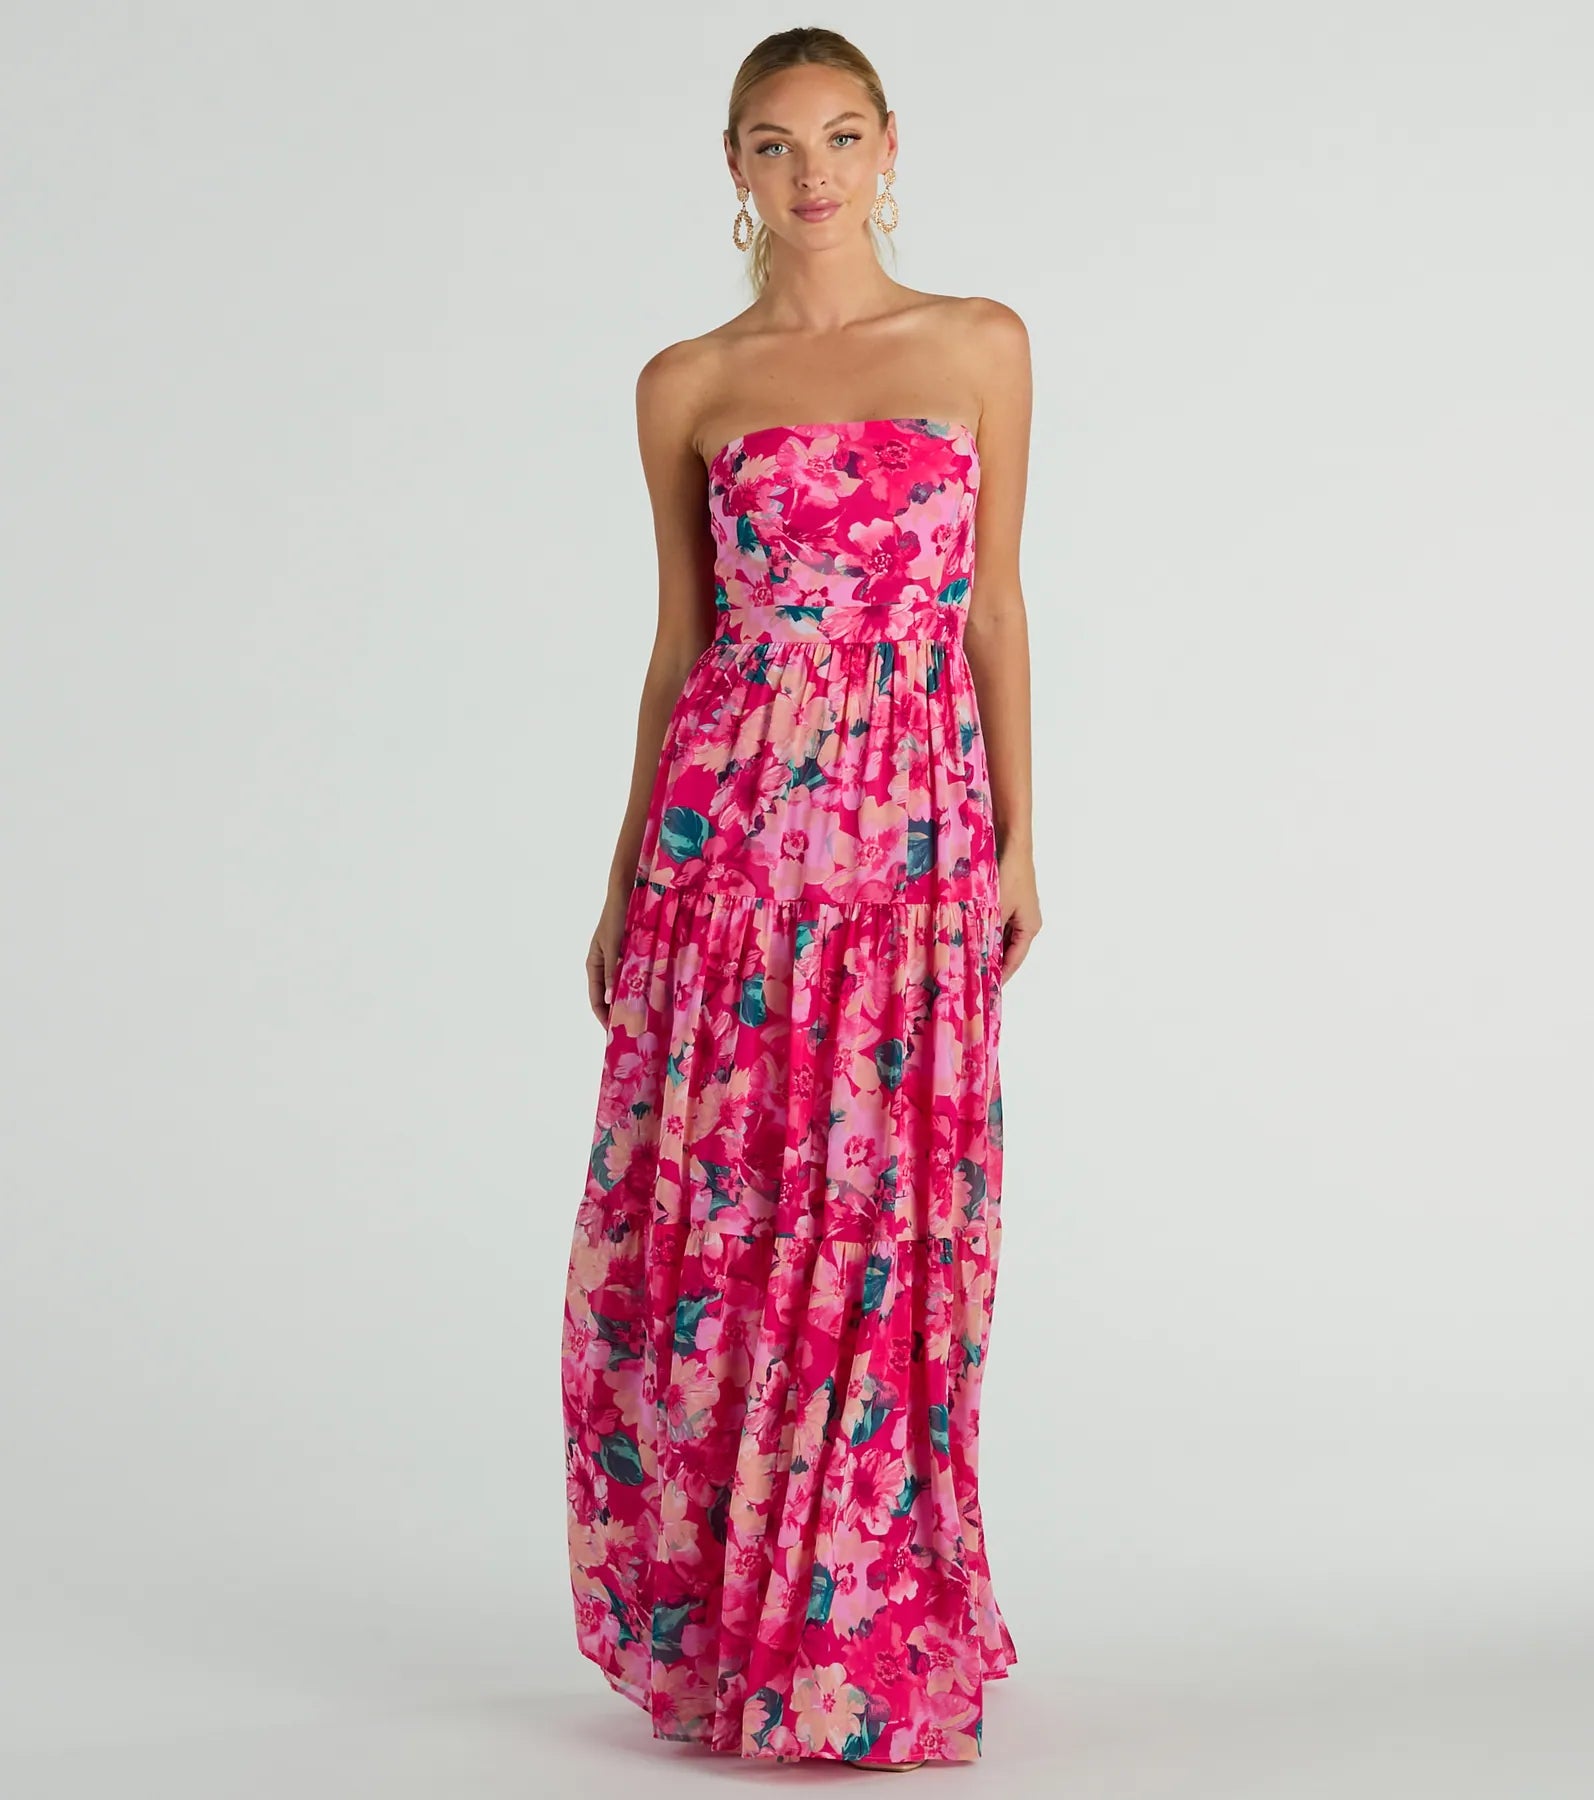 Strapless Flowy Back Zipper Stretchy Floral Print Maxi Dress With Ruffles